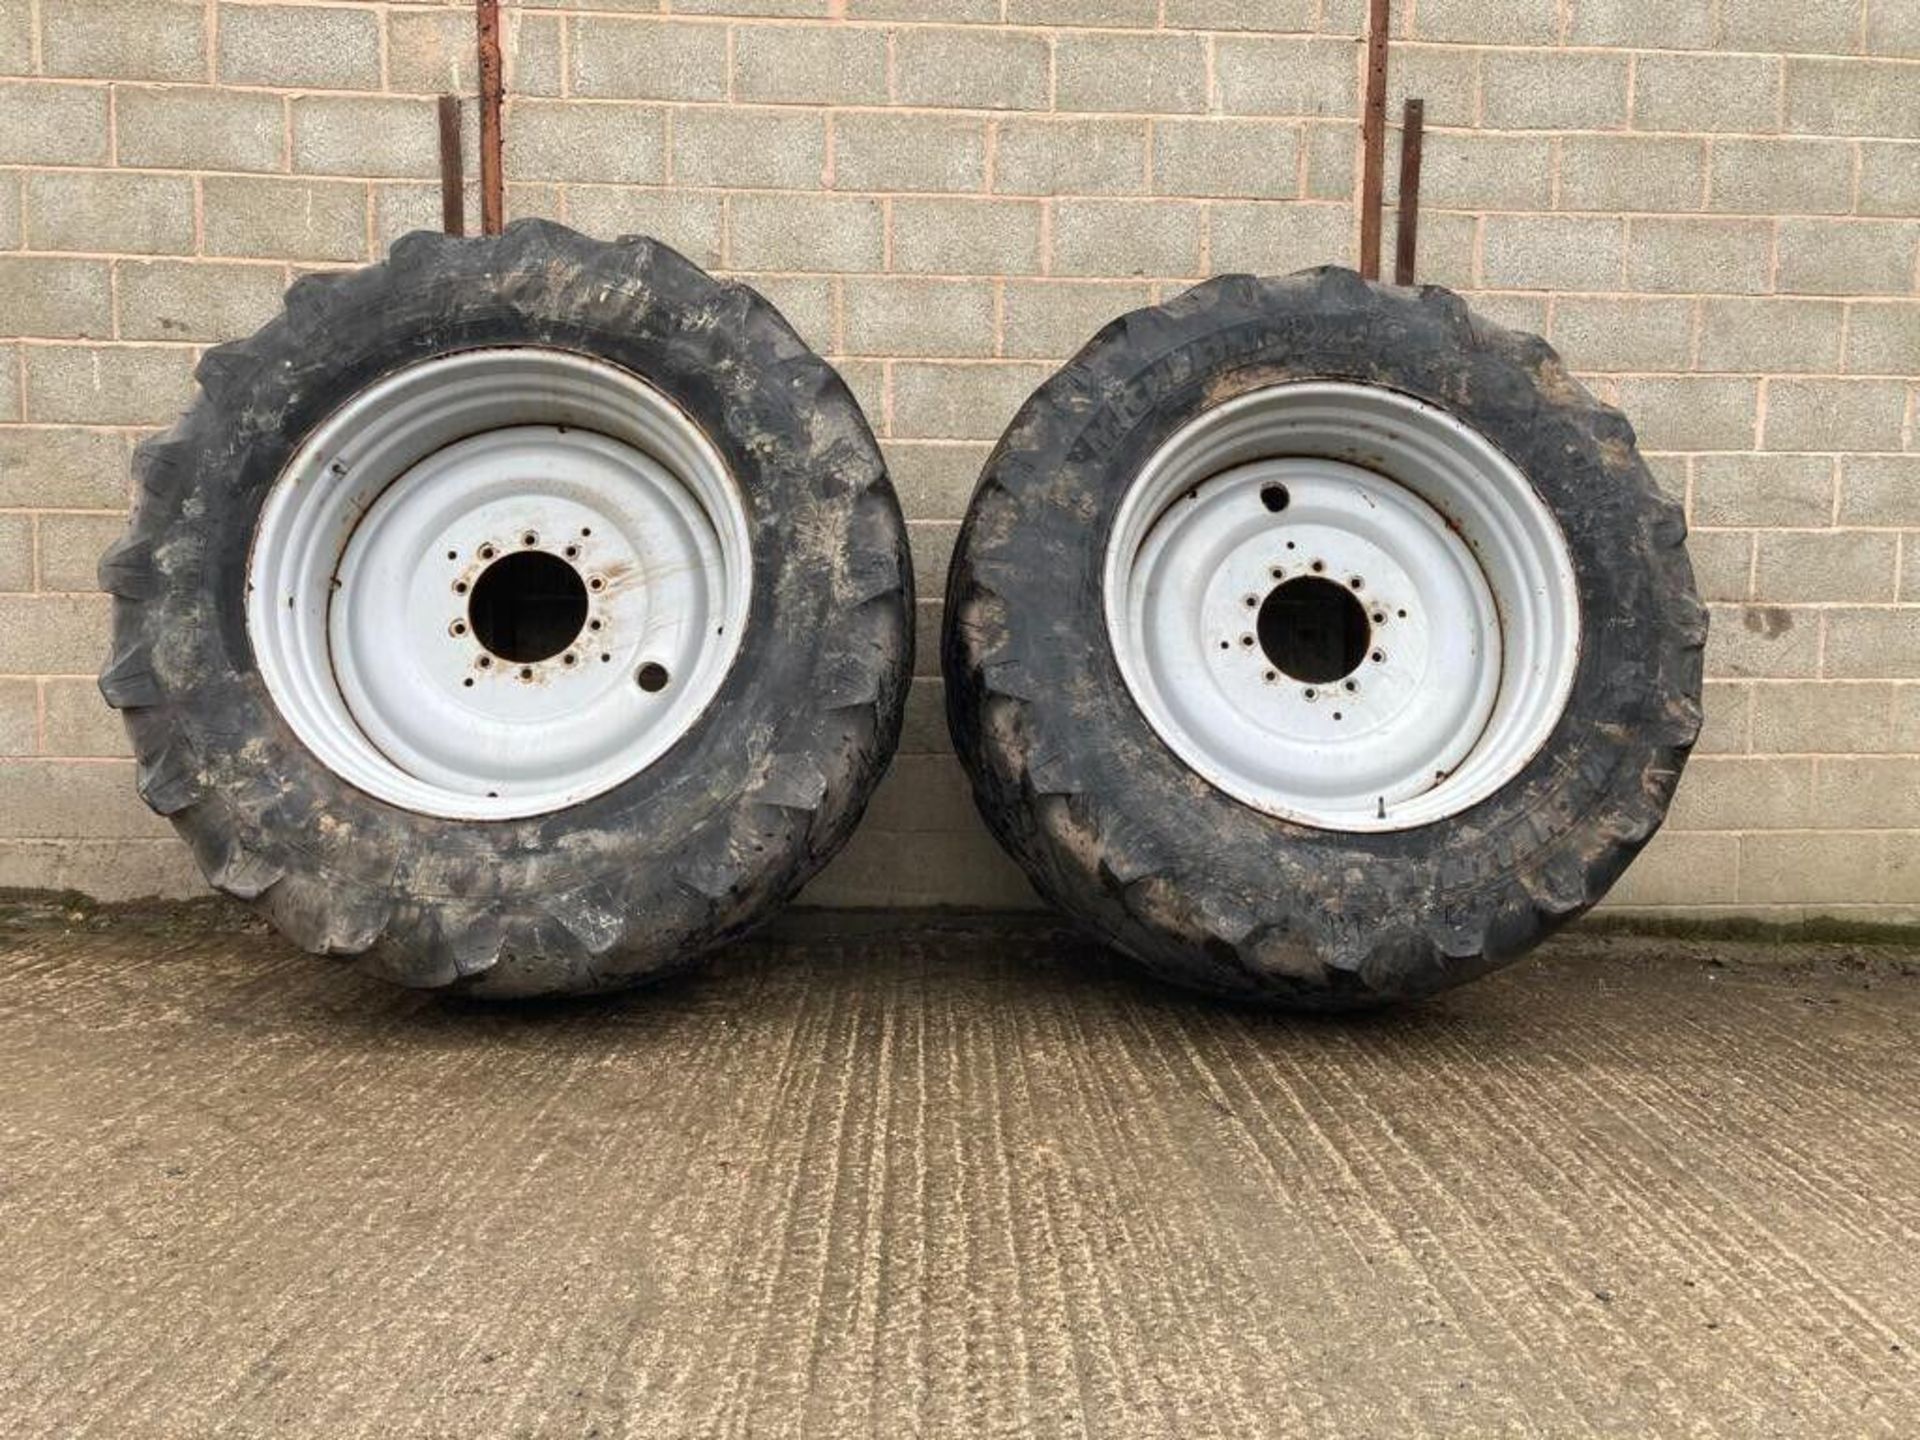 Set of 710/60R42 Michelin Tyres & 600/60R30 Michelin Tyres on Case Wheels - (Shropshire) - Image 2 of 10